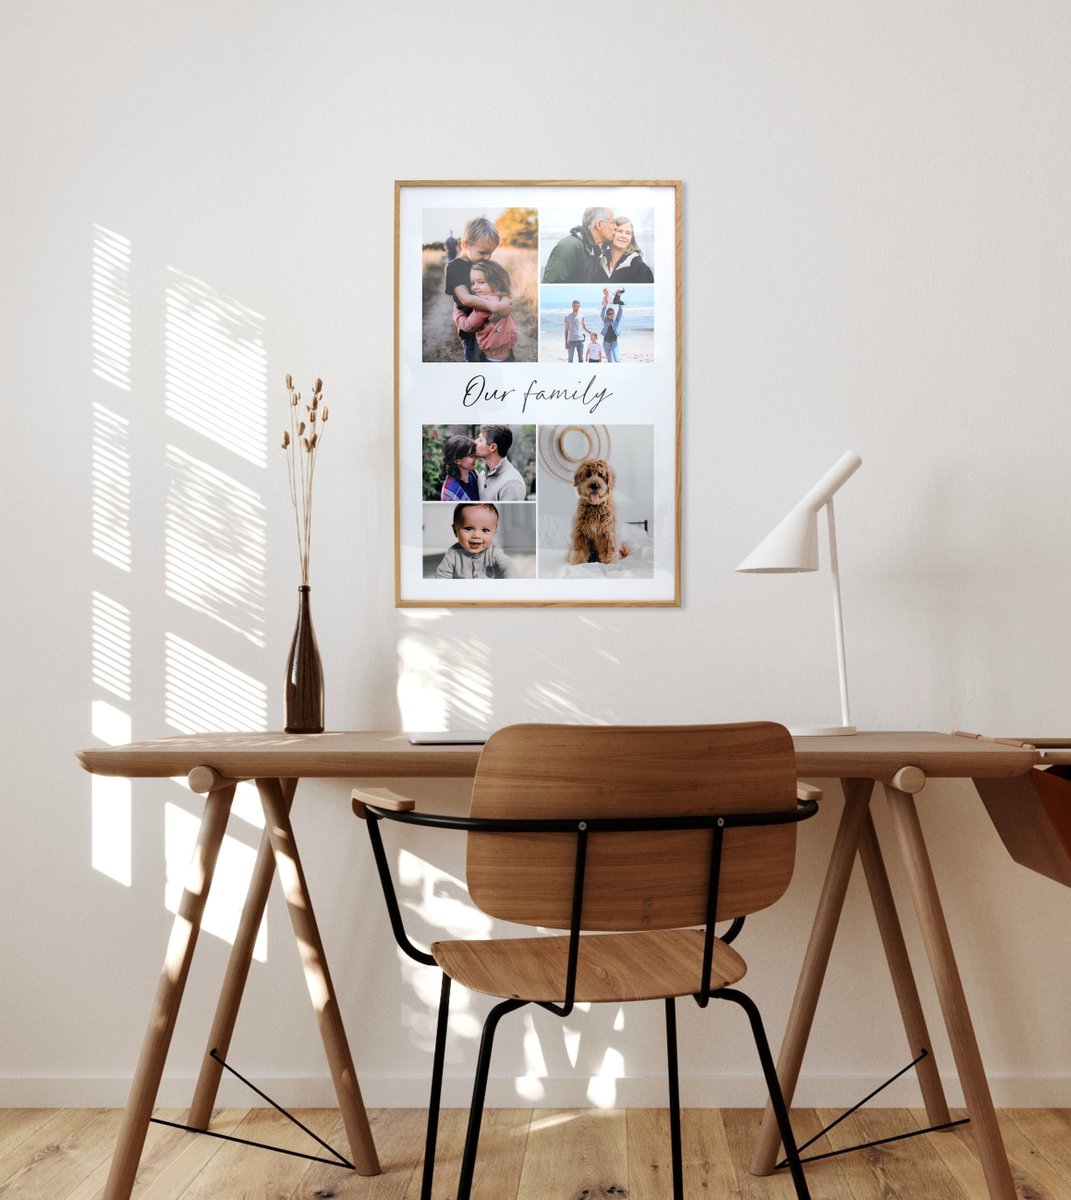 Ashenté frames come in an extensive range of sizes from 4x6' upto 30x40', suitable for any space. Available in oak, black and  white with a high-quality finish.  
ow.ly/oR8K50NHWS0 
#Adventa #WallArt #HomeDecor #PhotoGift